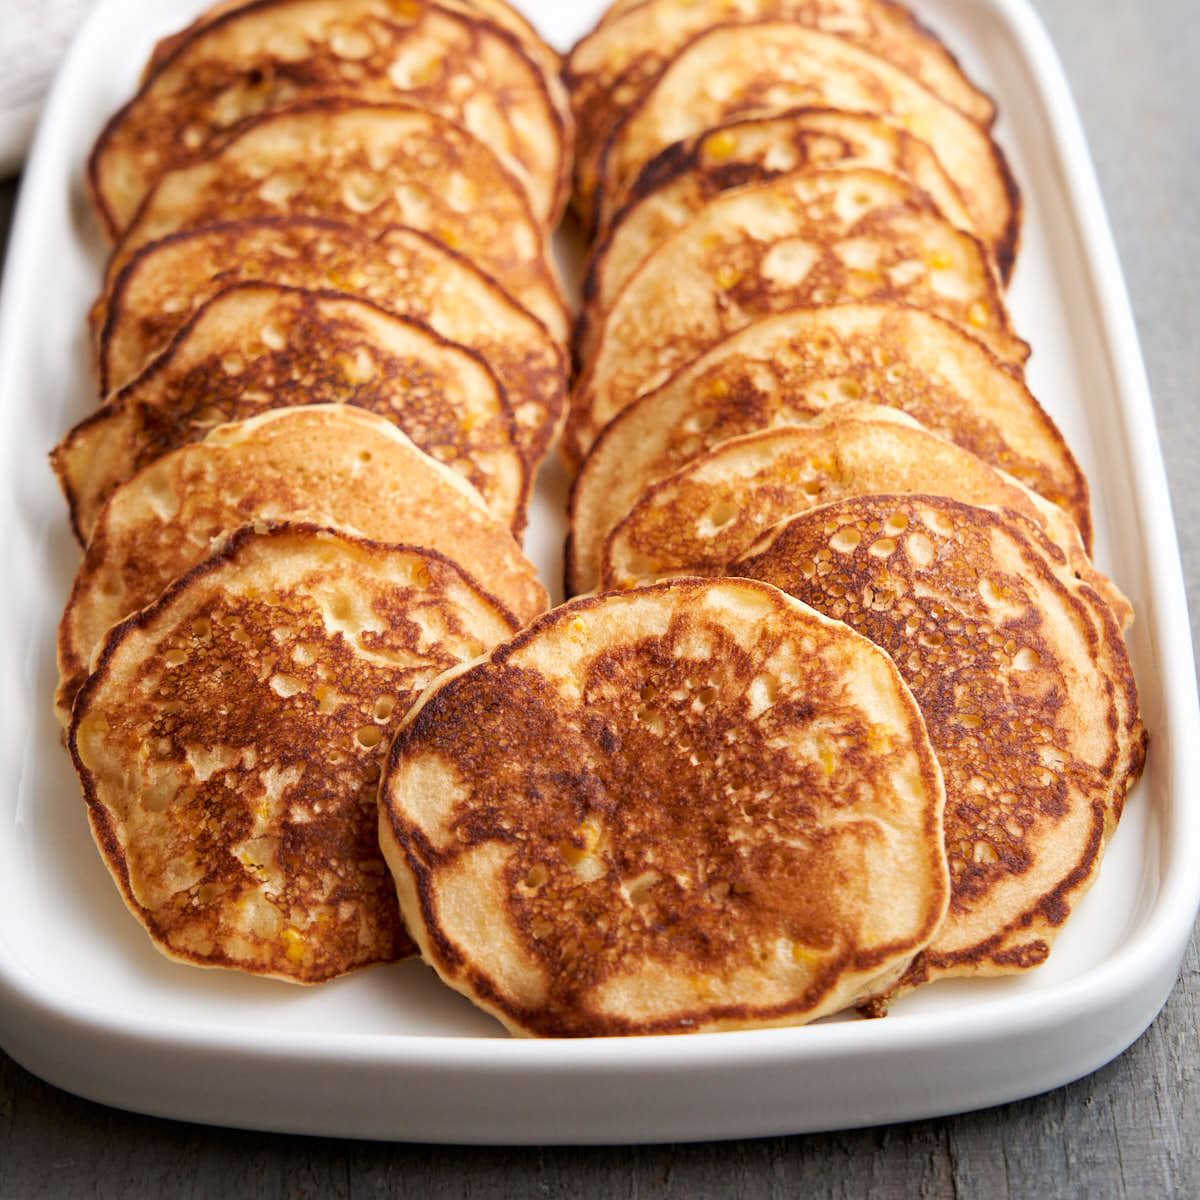 corn pancakes made with canned cream corn